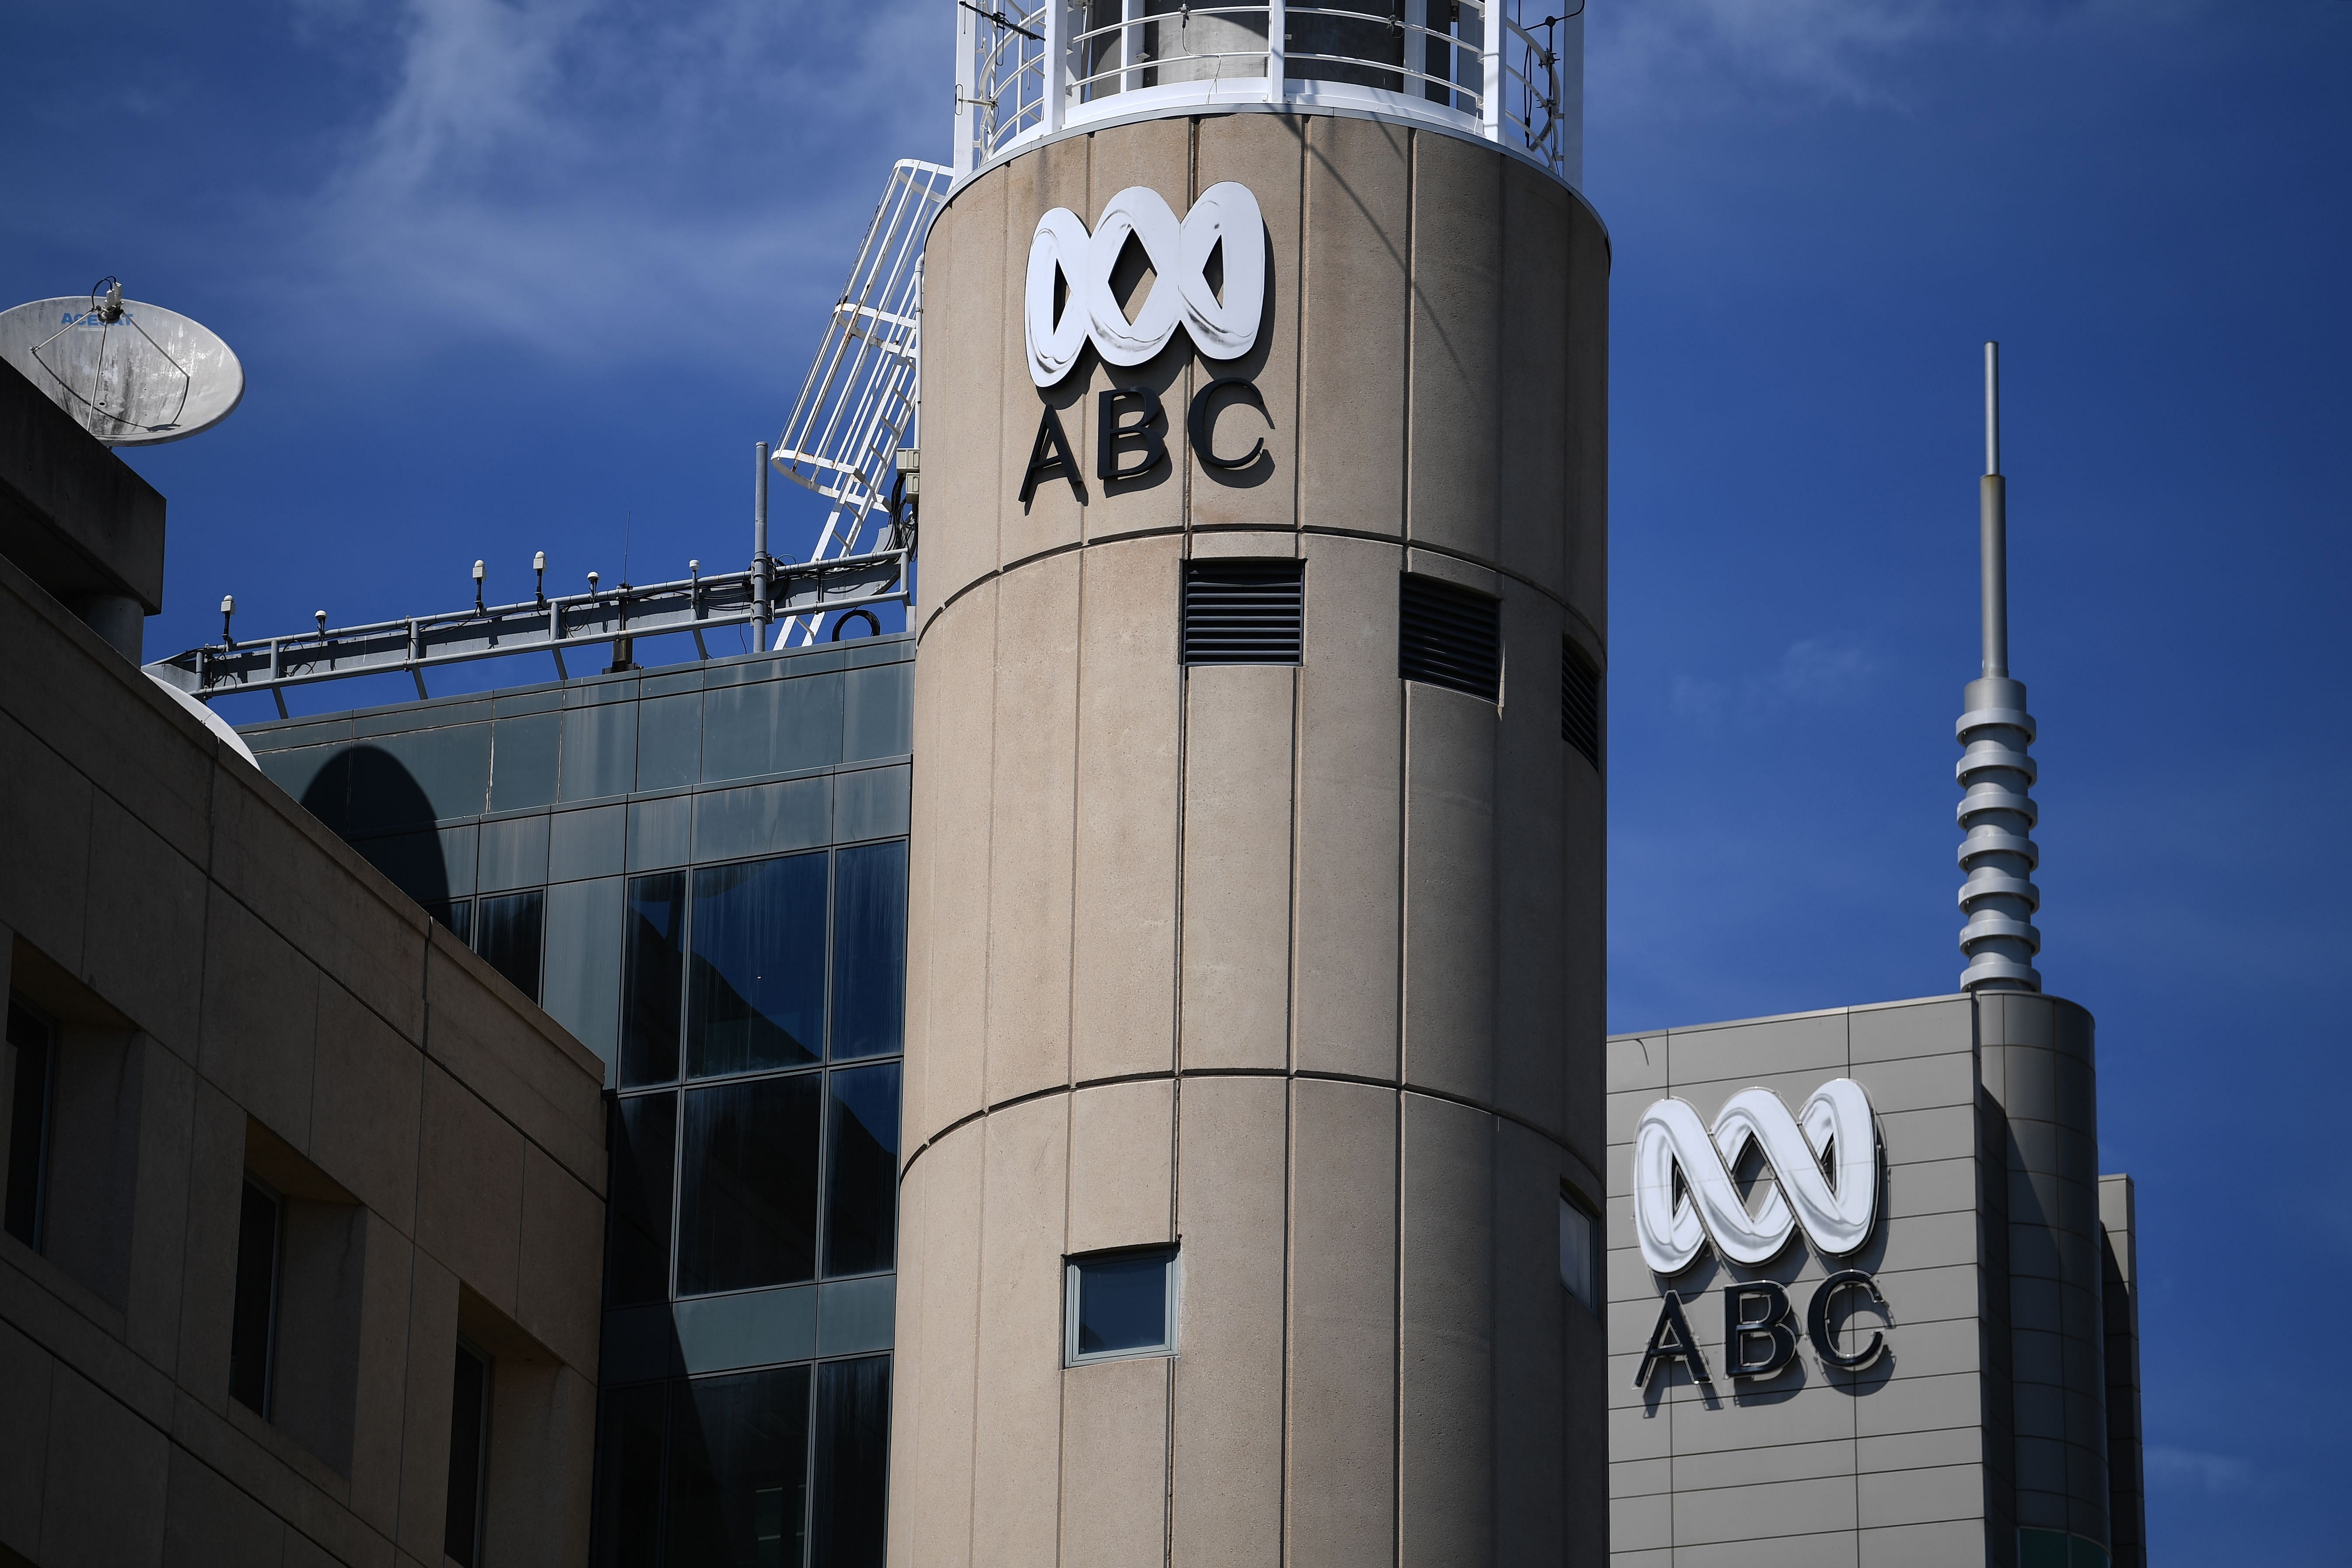 In this file photo taken on September 27, 2018 the logo for Australia's public broadcaster ABC is seen at its head office building in Sydney. - Australian police raided the headquarters of public broadcaster ABC on June 5, 2019, the second high-profile probe into news outlets in 24 hours, amid a crackdown on sensitive leaks. Credit: AFP